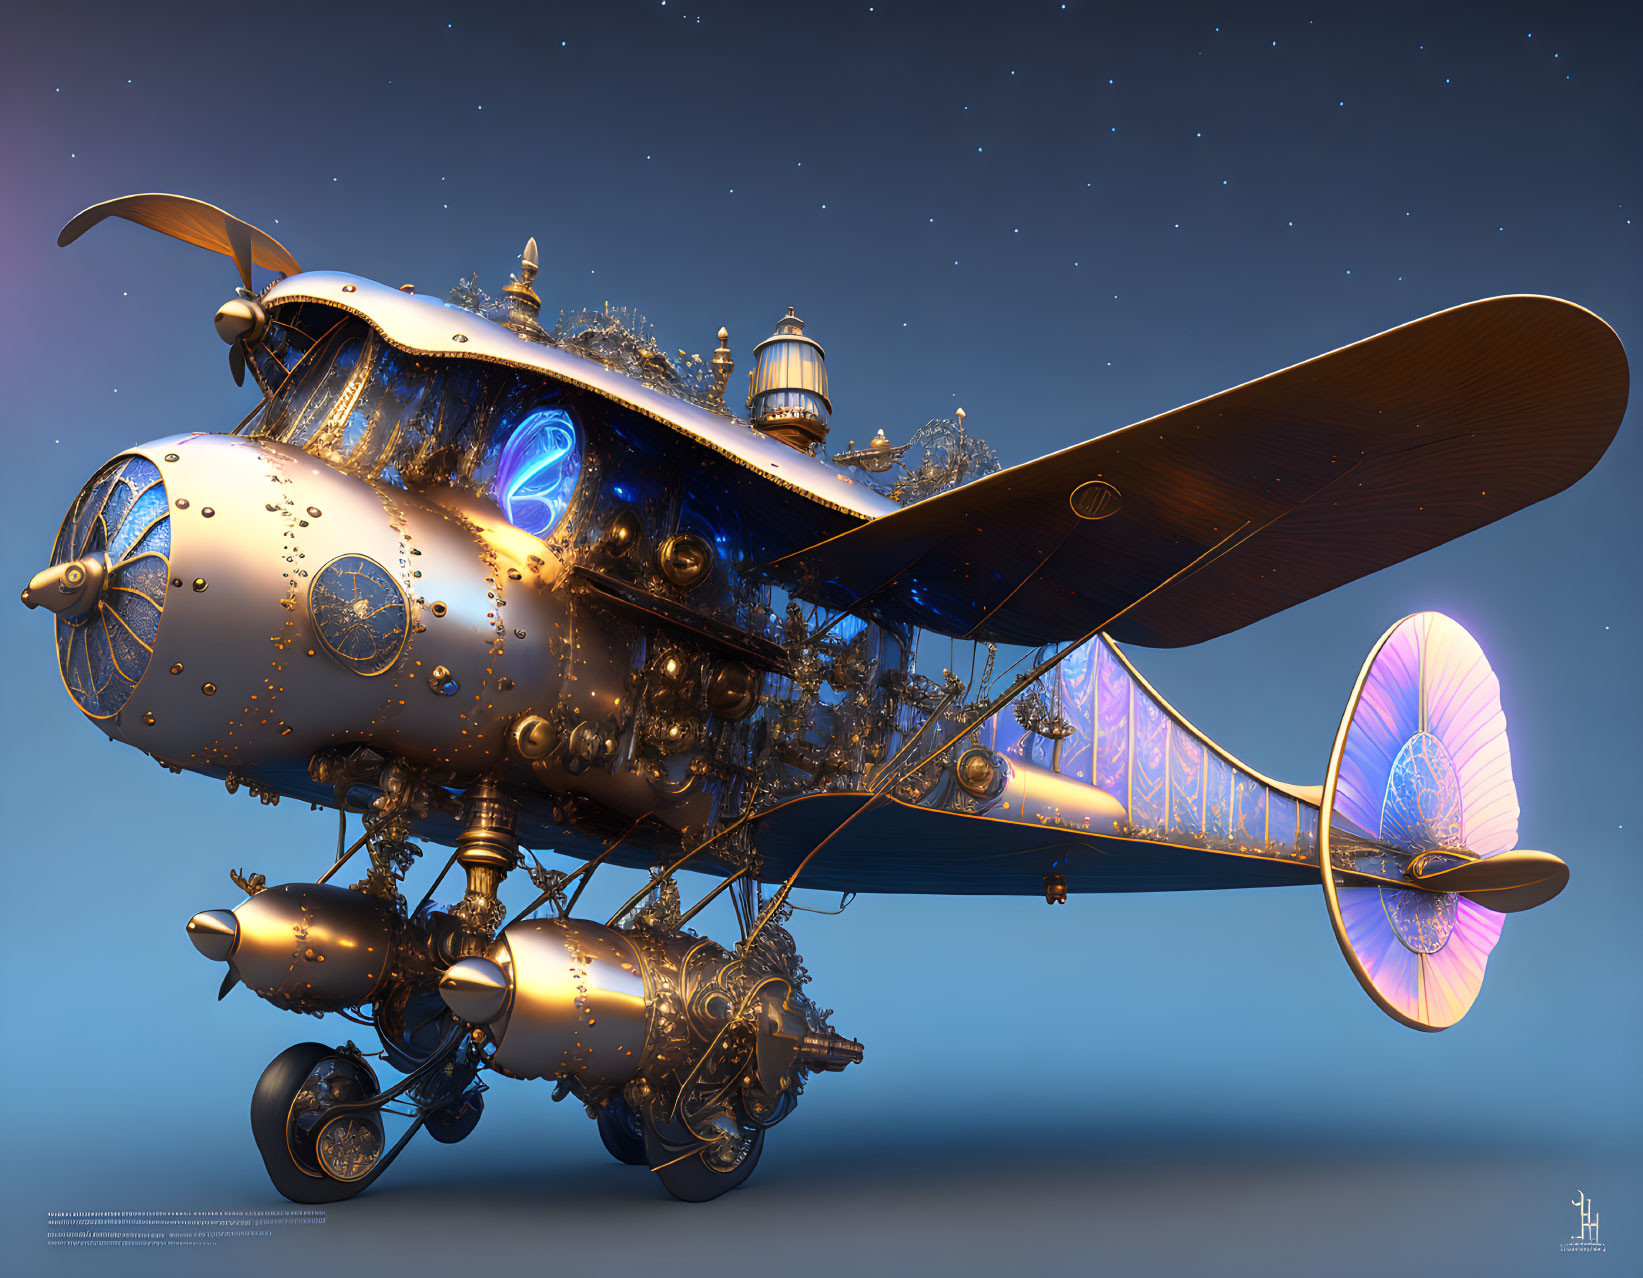 Steampunk airship with glowing blue accents in twilight sky